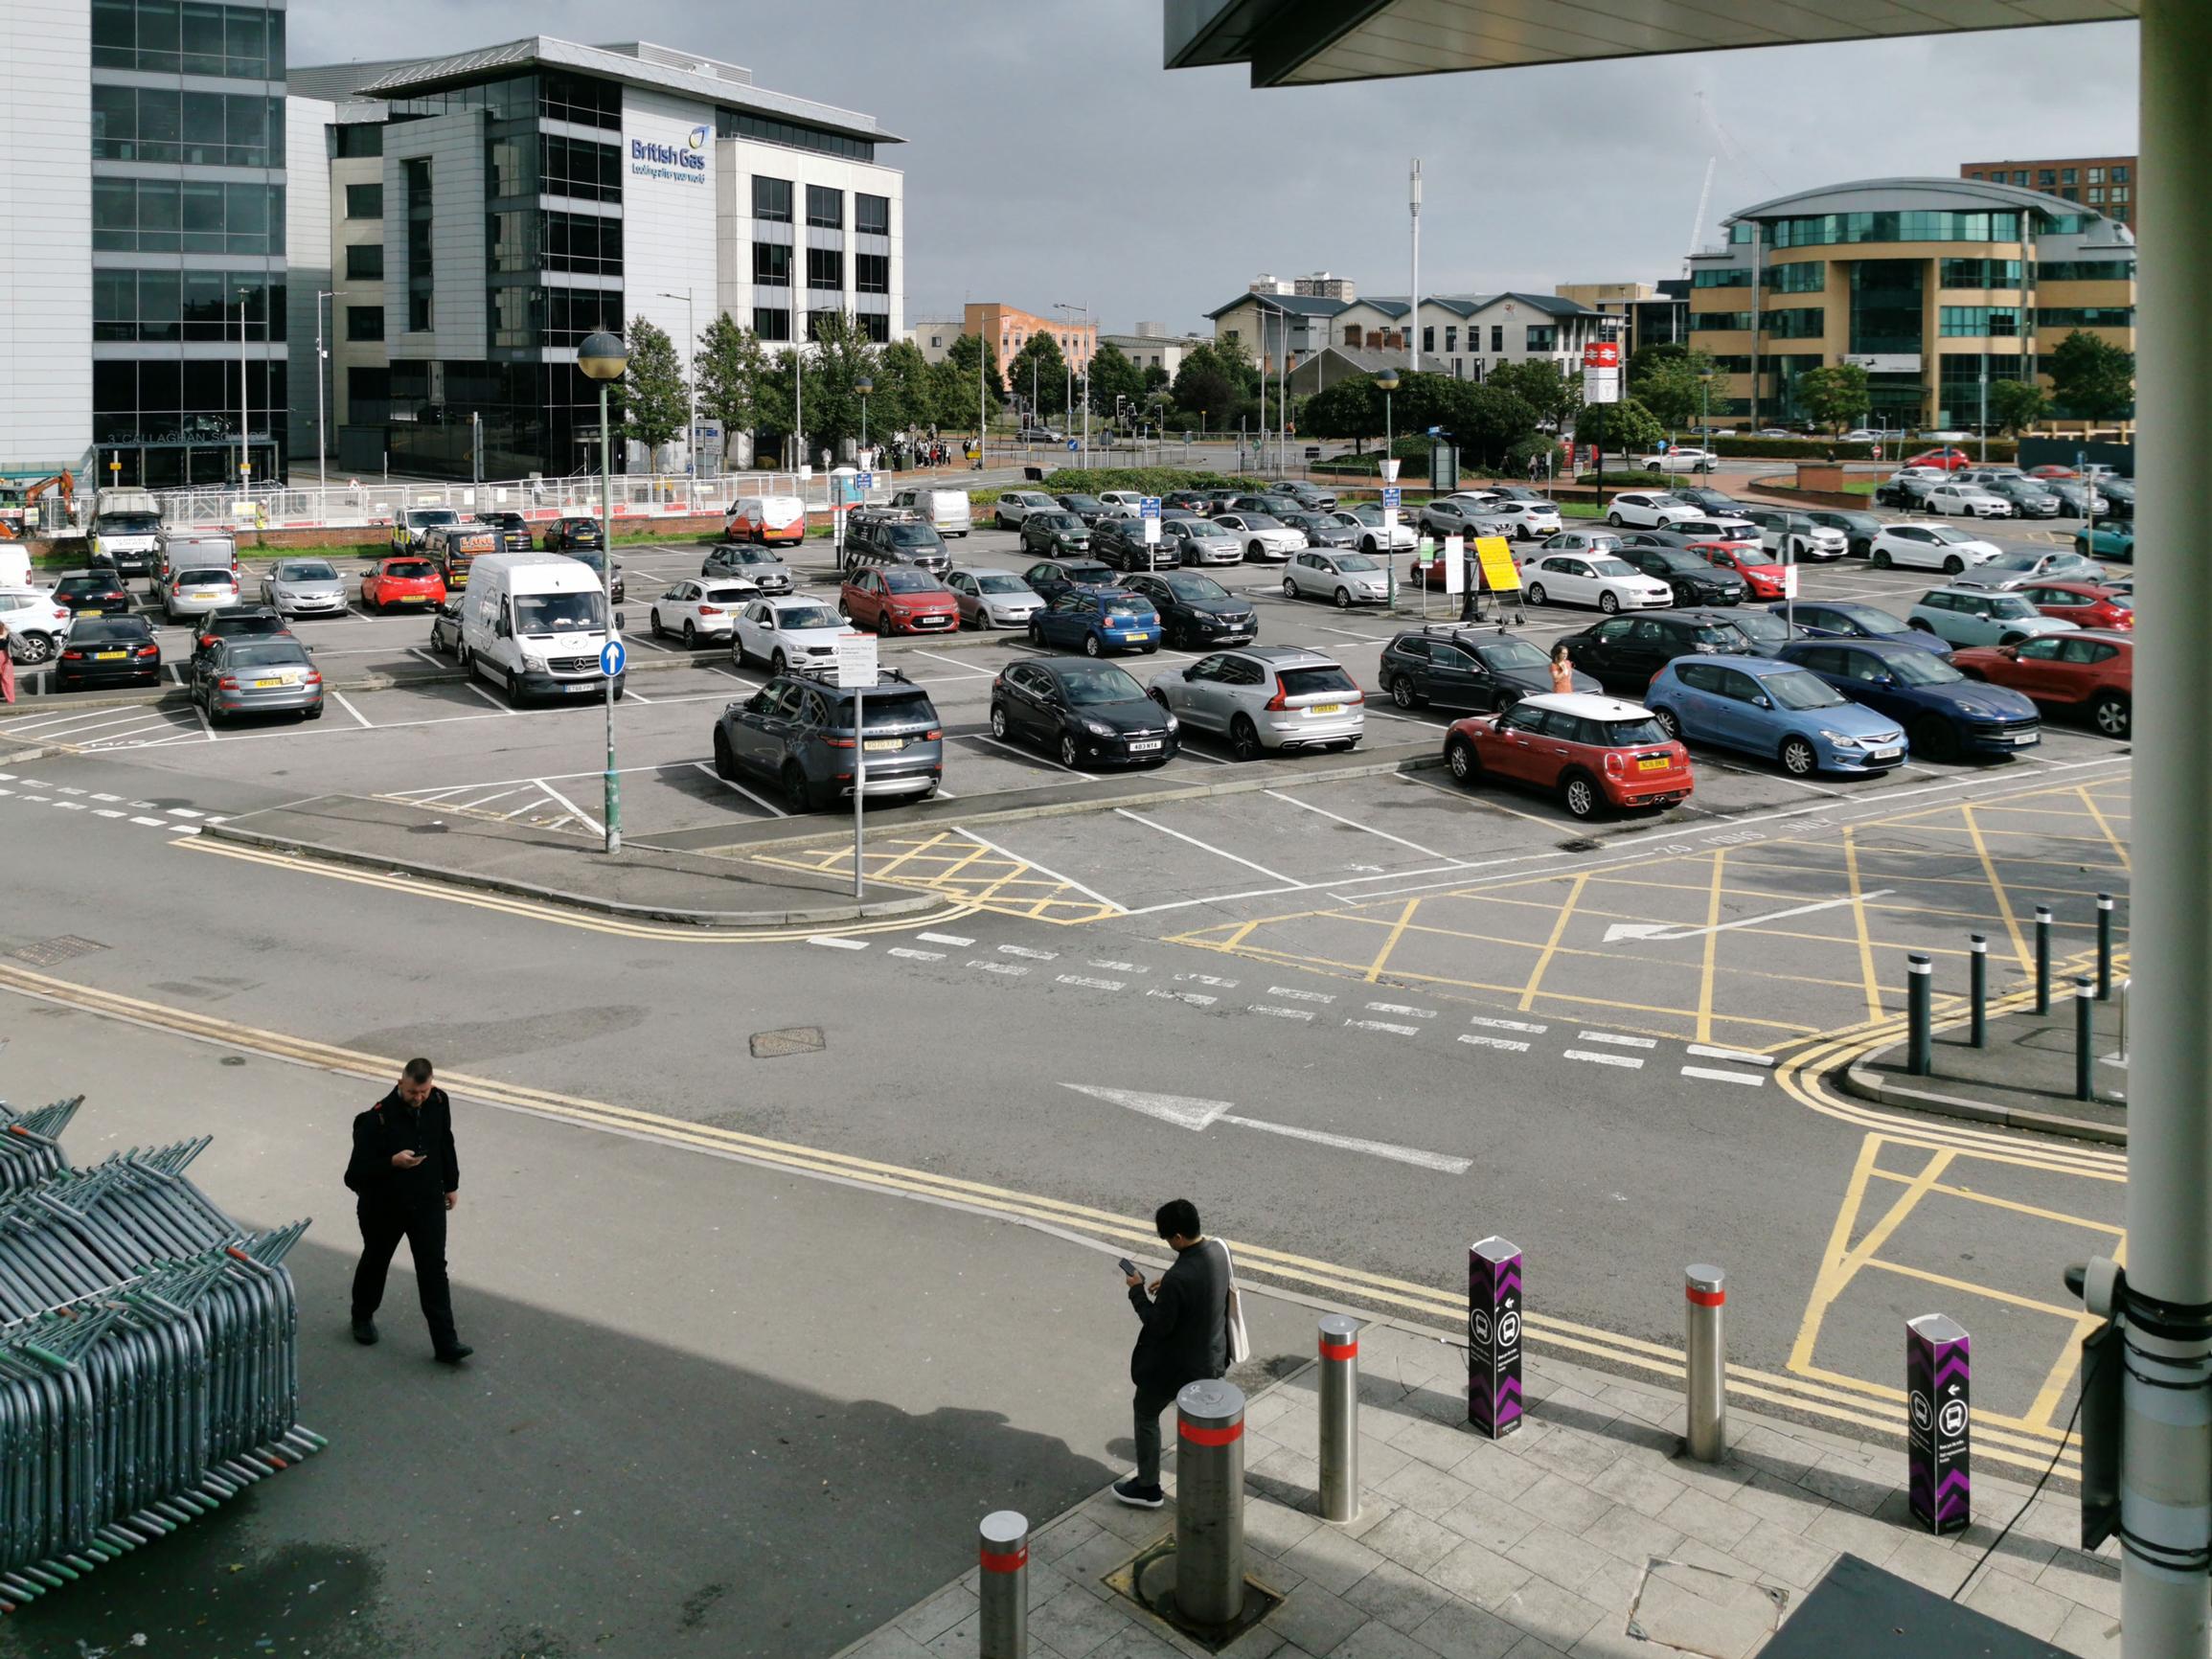 The car park south of Cardiff Central, with the station entrance off to the right. This area and Callaghan Square, beyond the offices on the left, will be remodelled when the tram tracks are installed